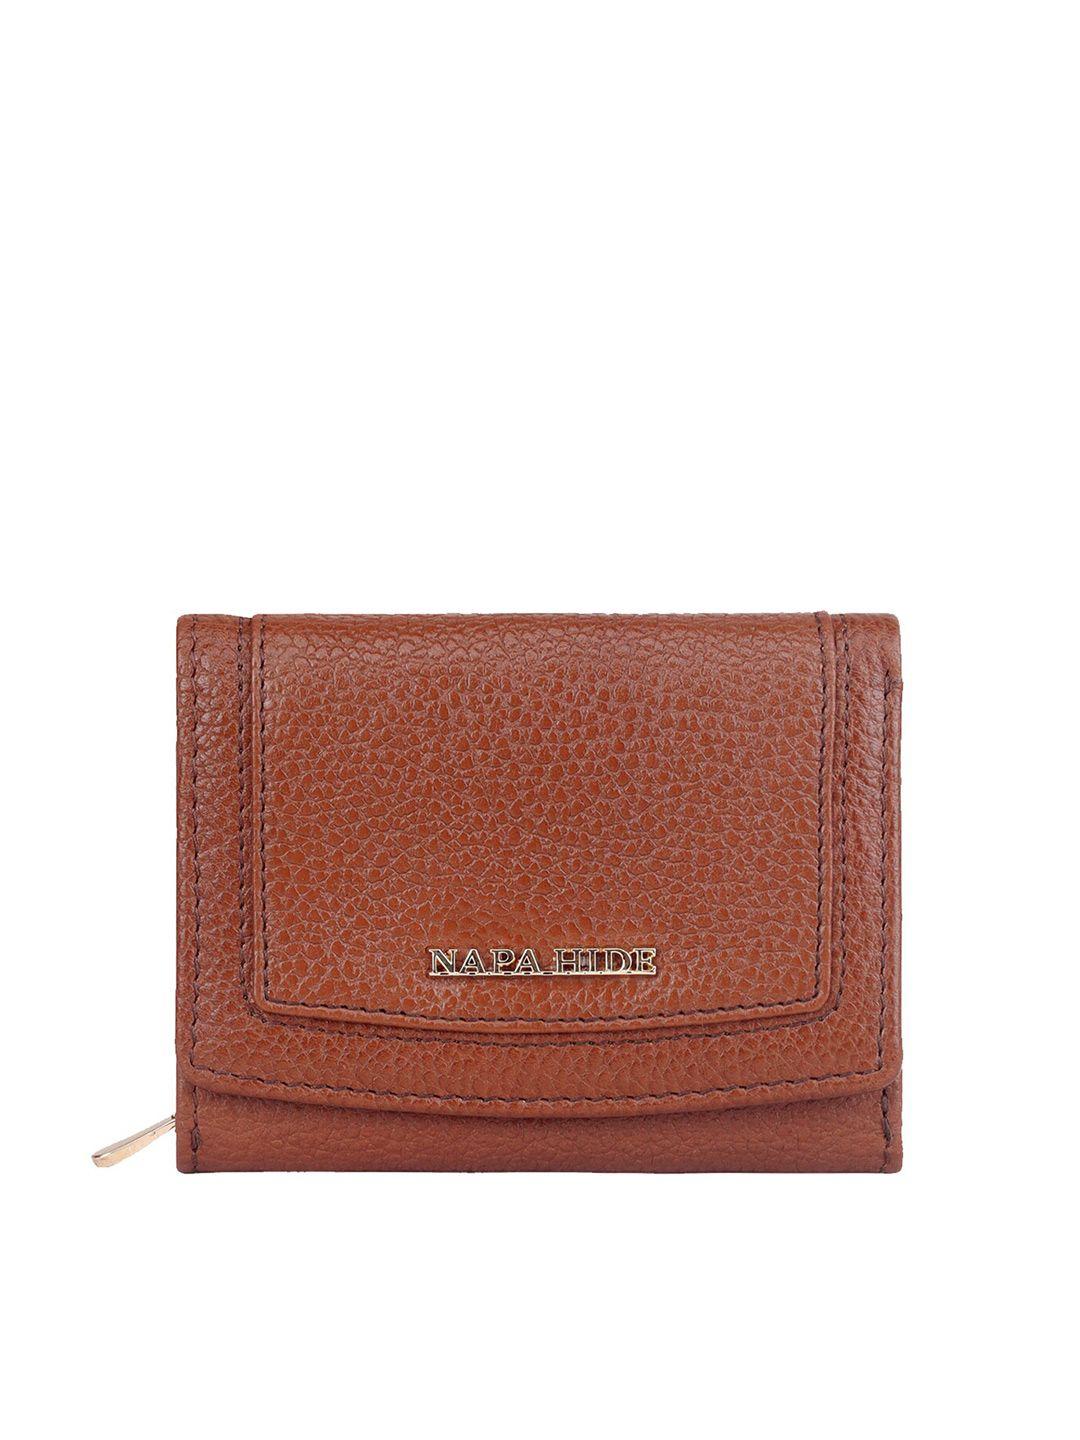 napa hide textured leather three fold wallet